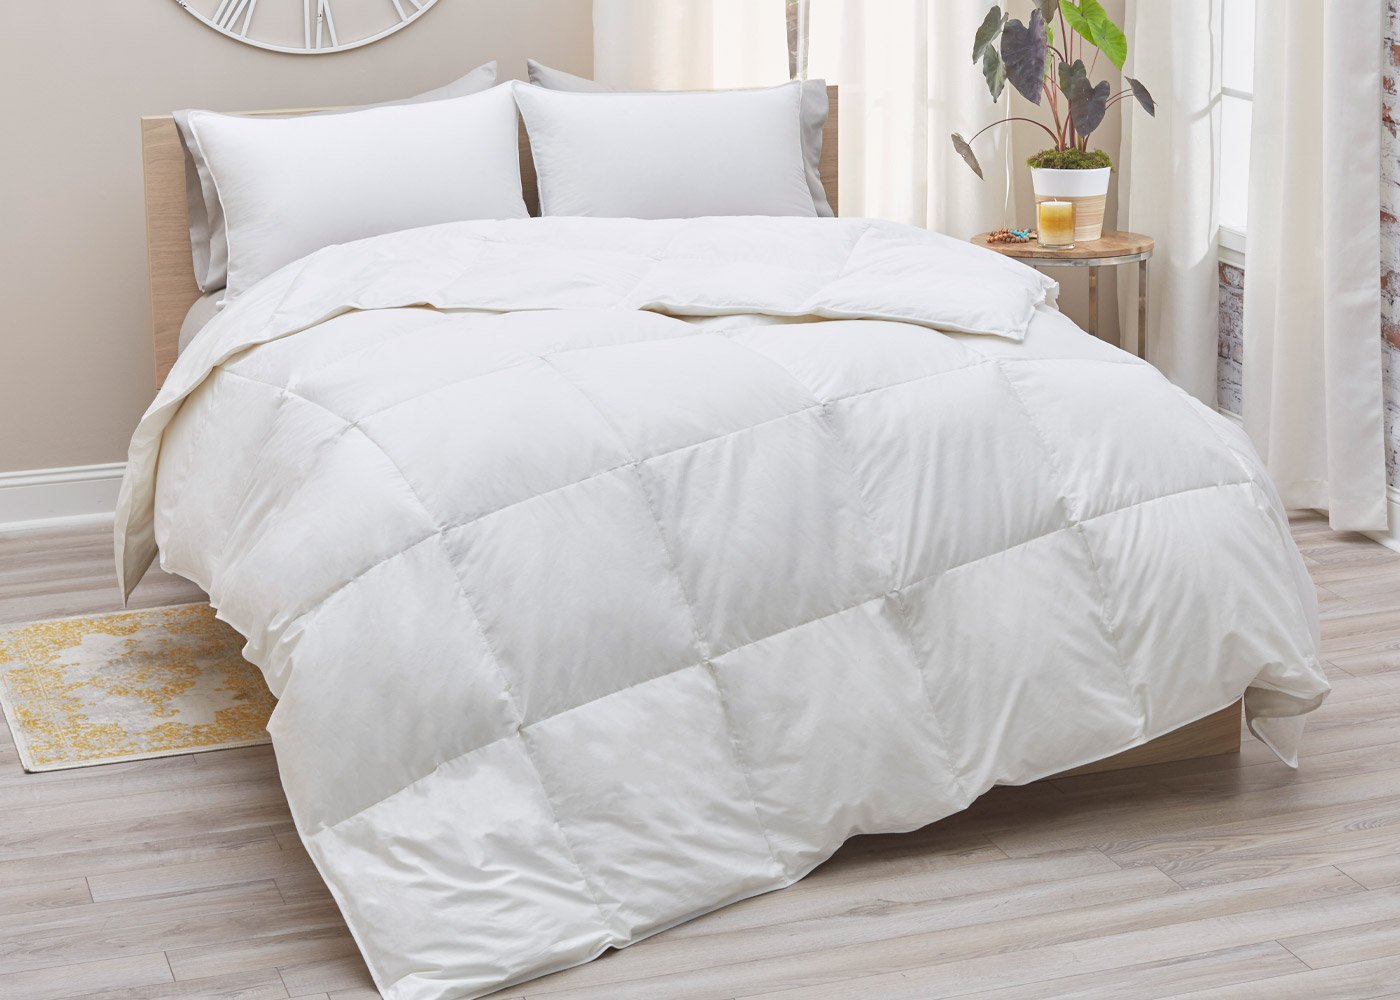 Goose Down Comforter by Down Decor